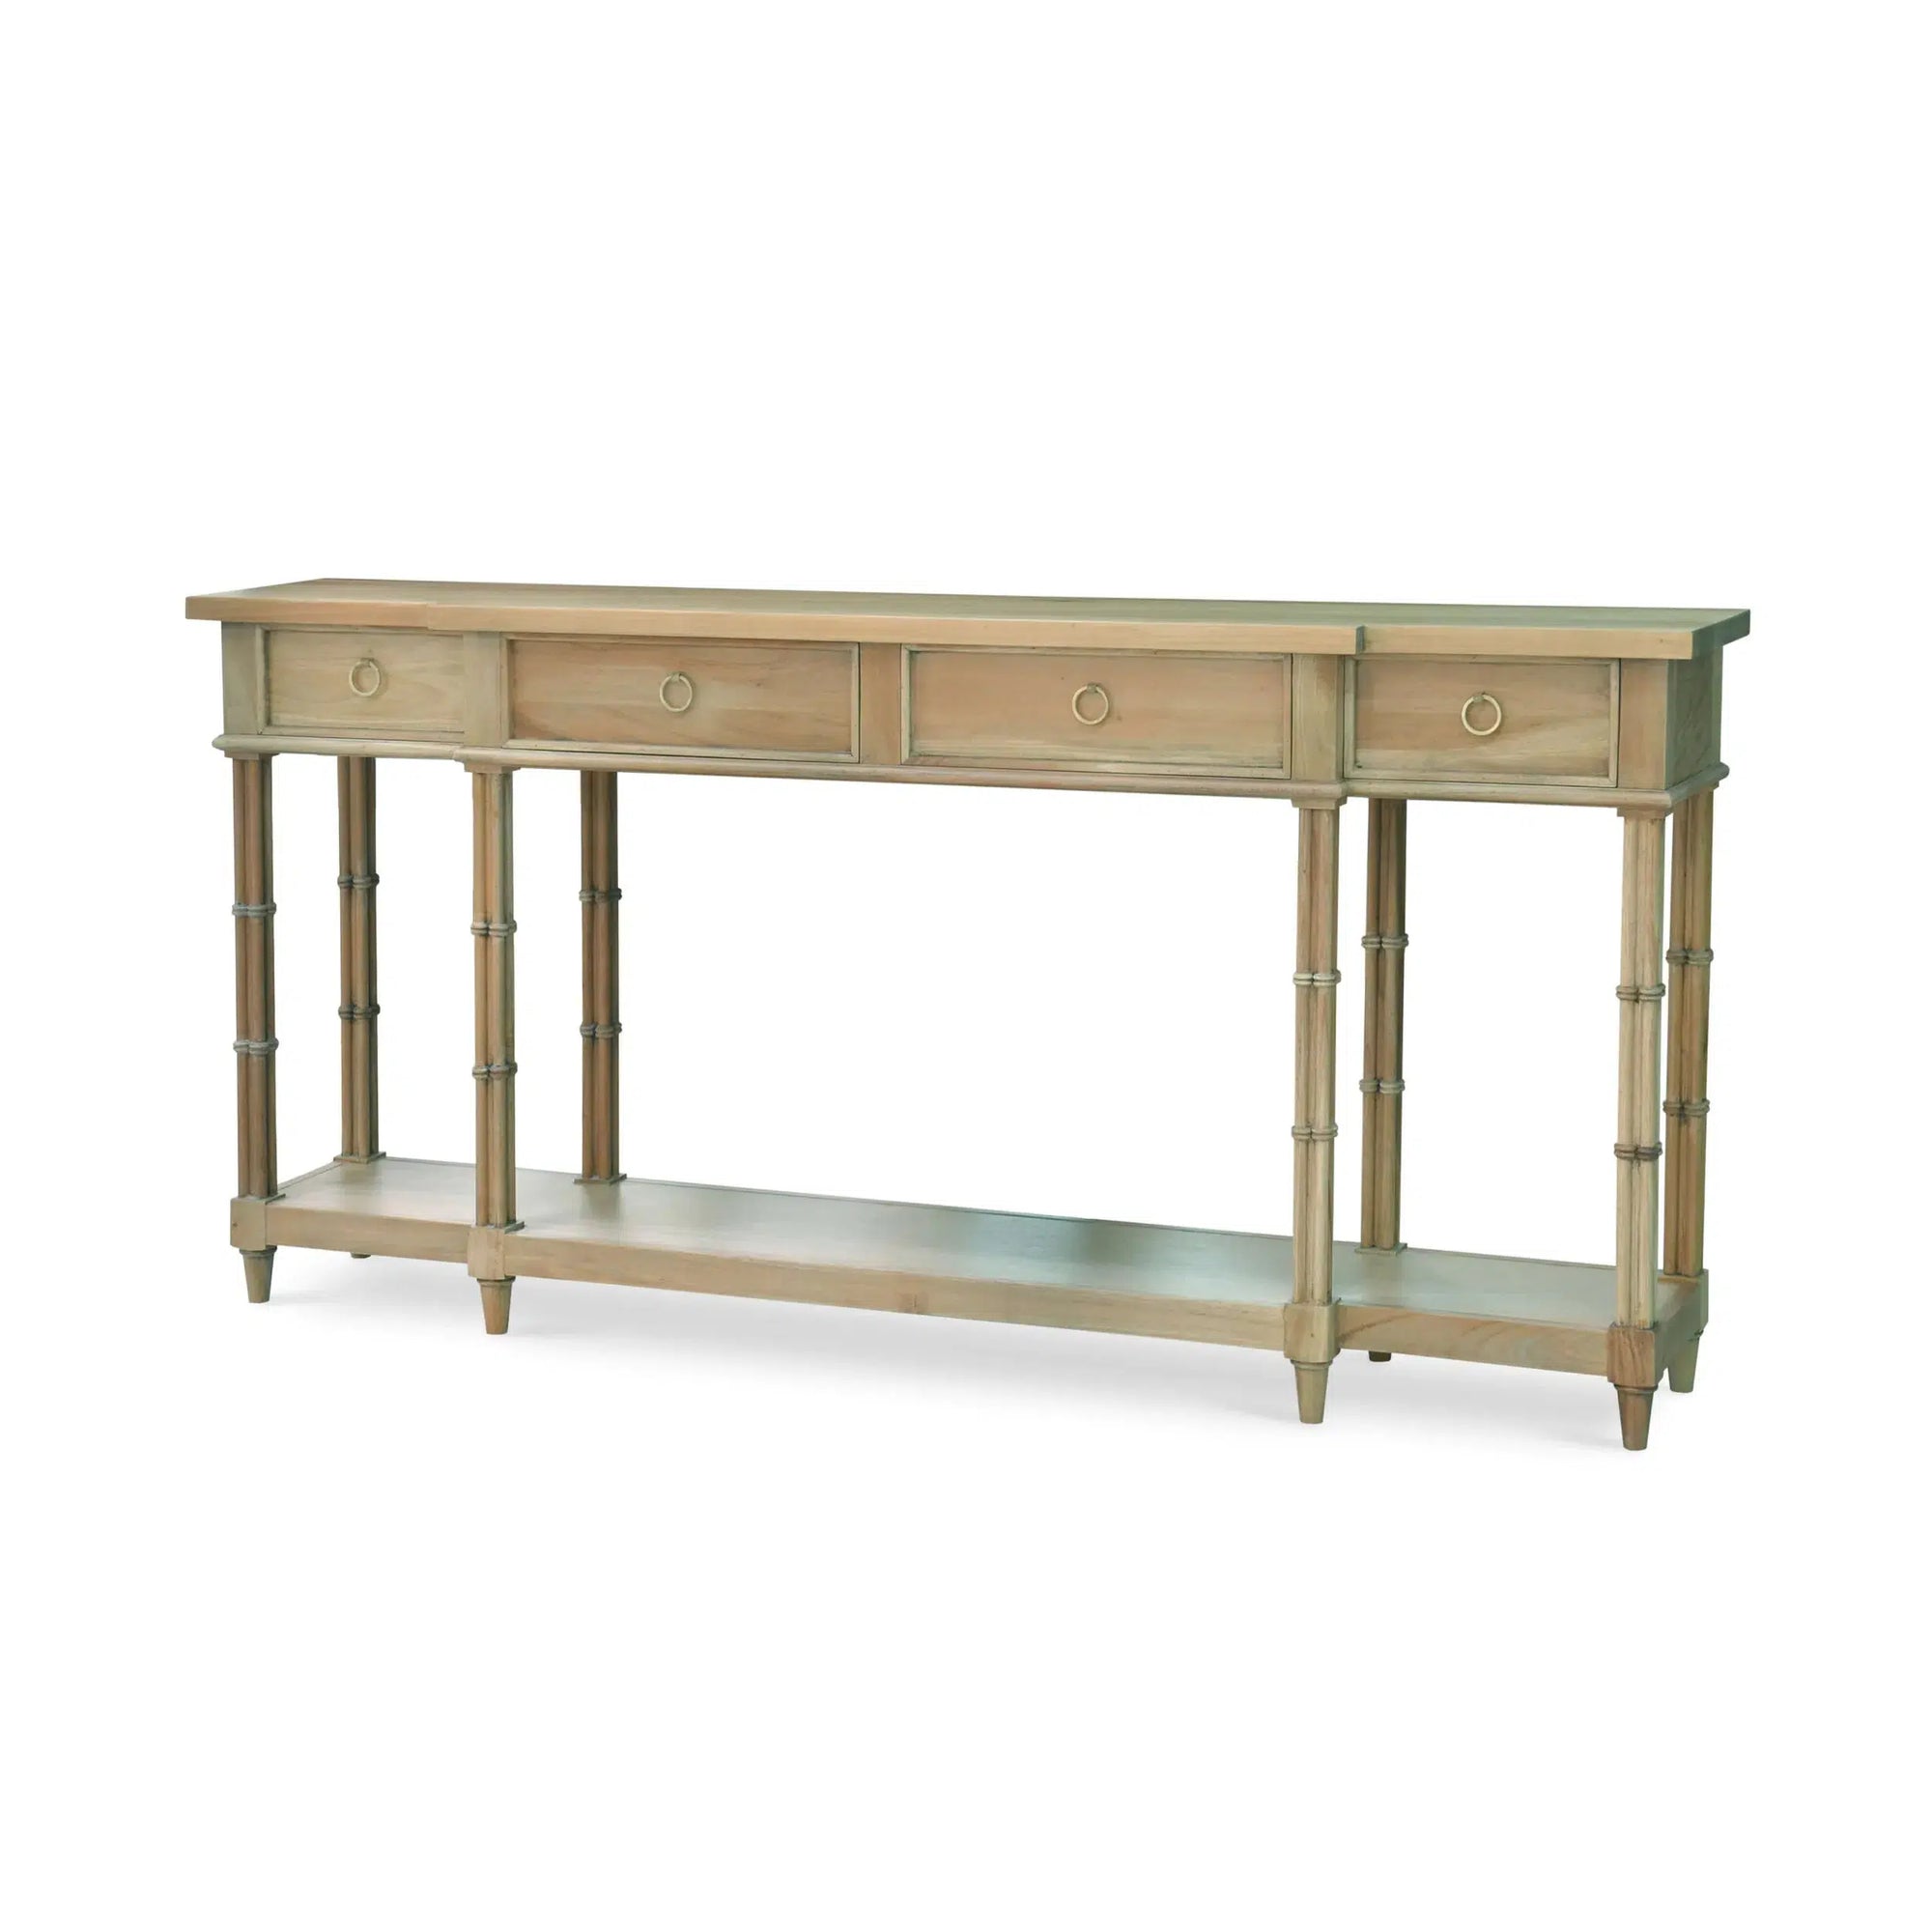 Farringdon Large Console In Fruitwood-Blue Hand Home